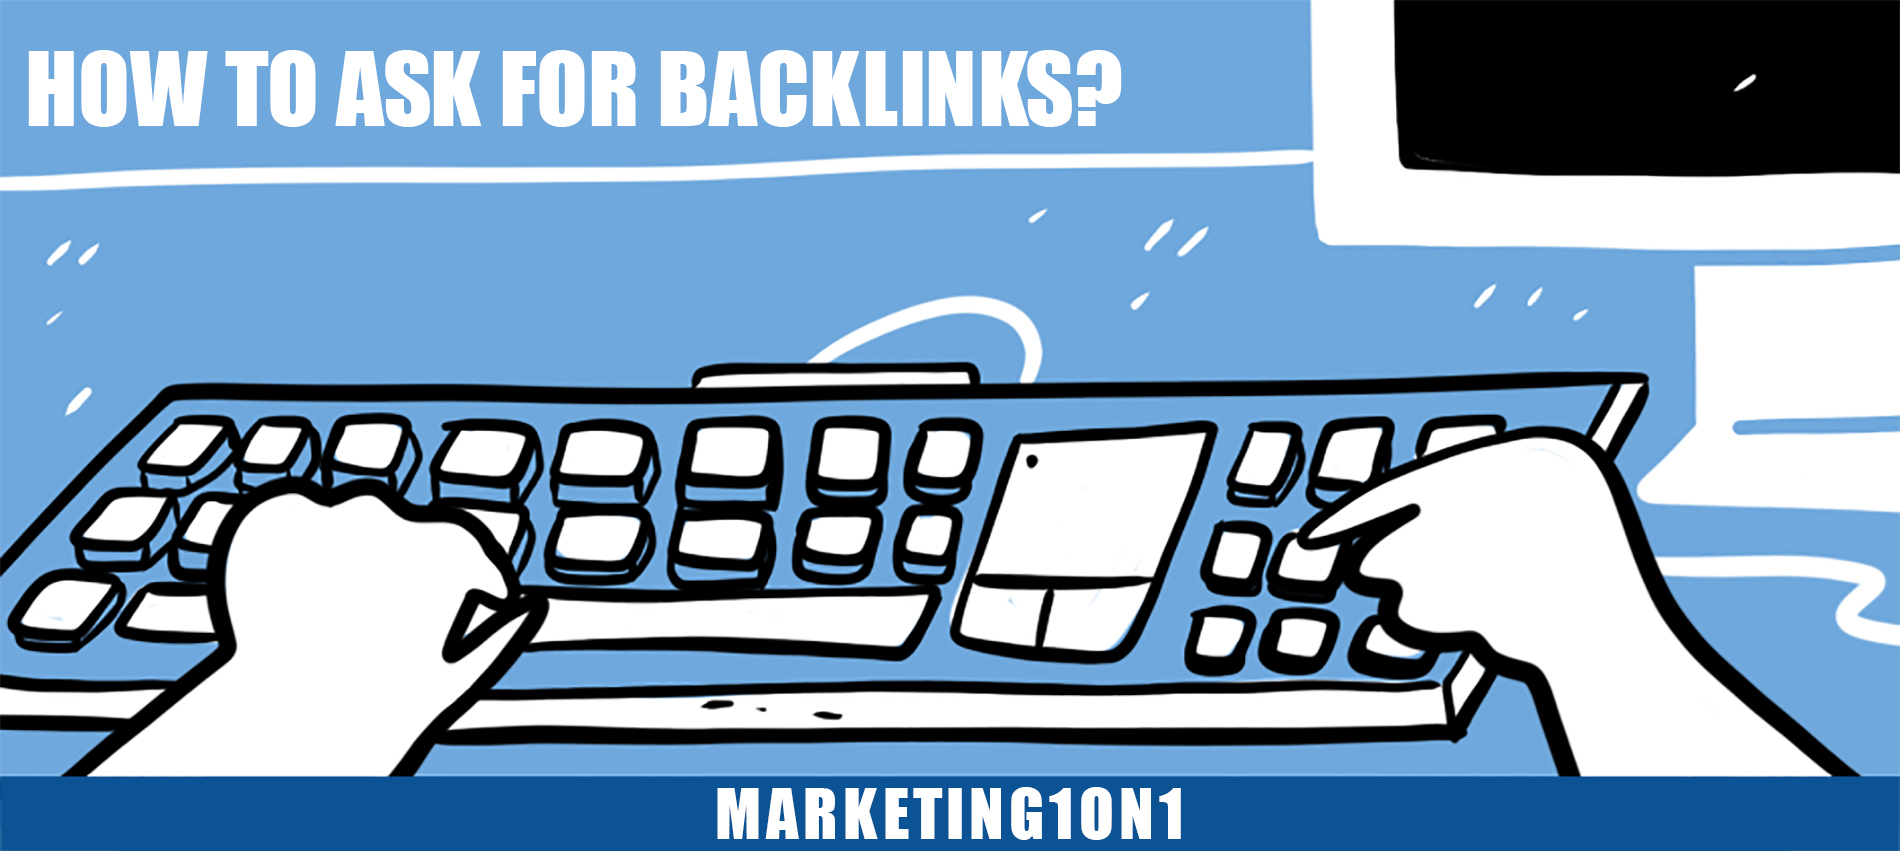 How to ask for backlinks?